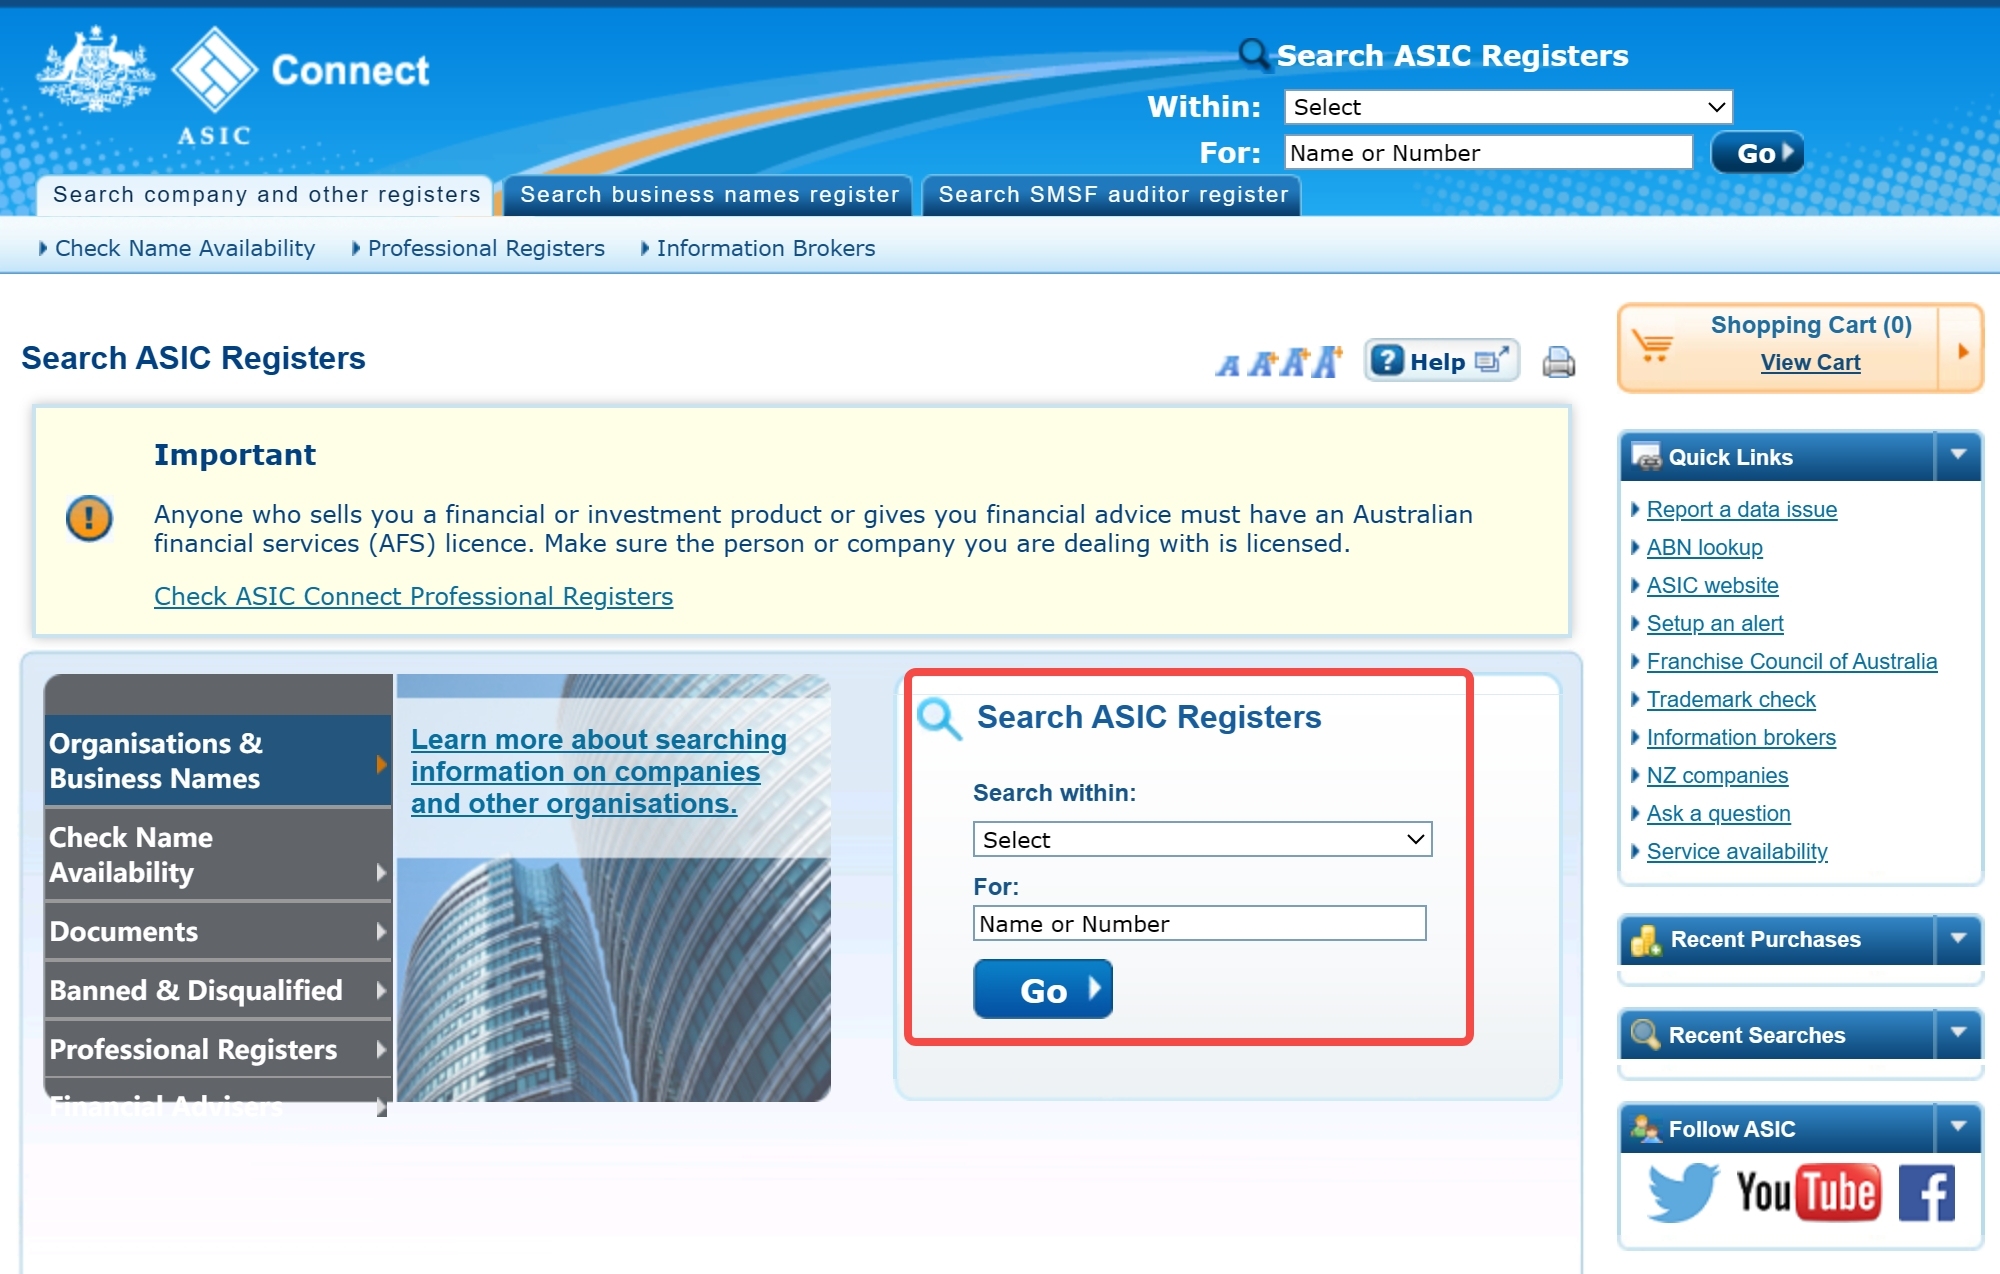 'Search ASIC Registers' page